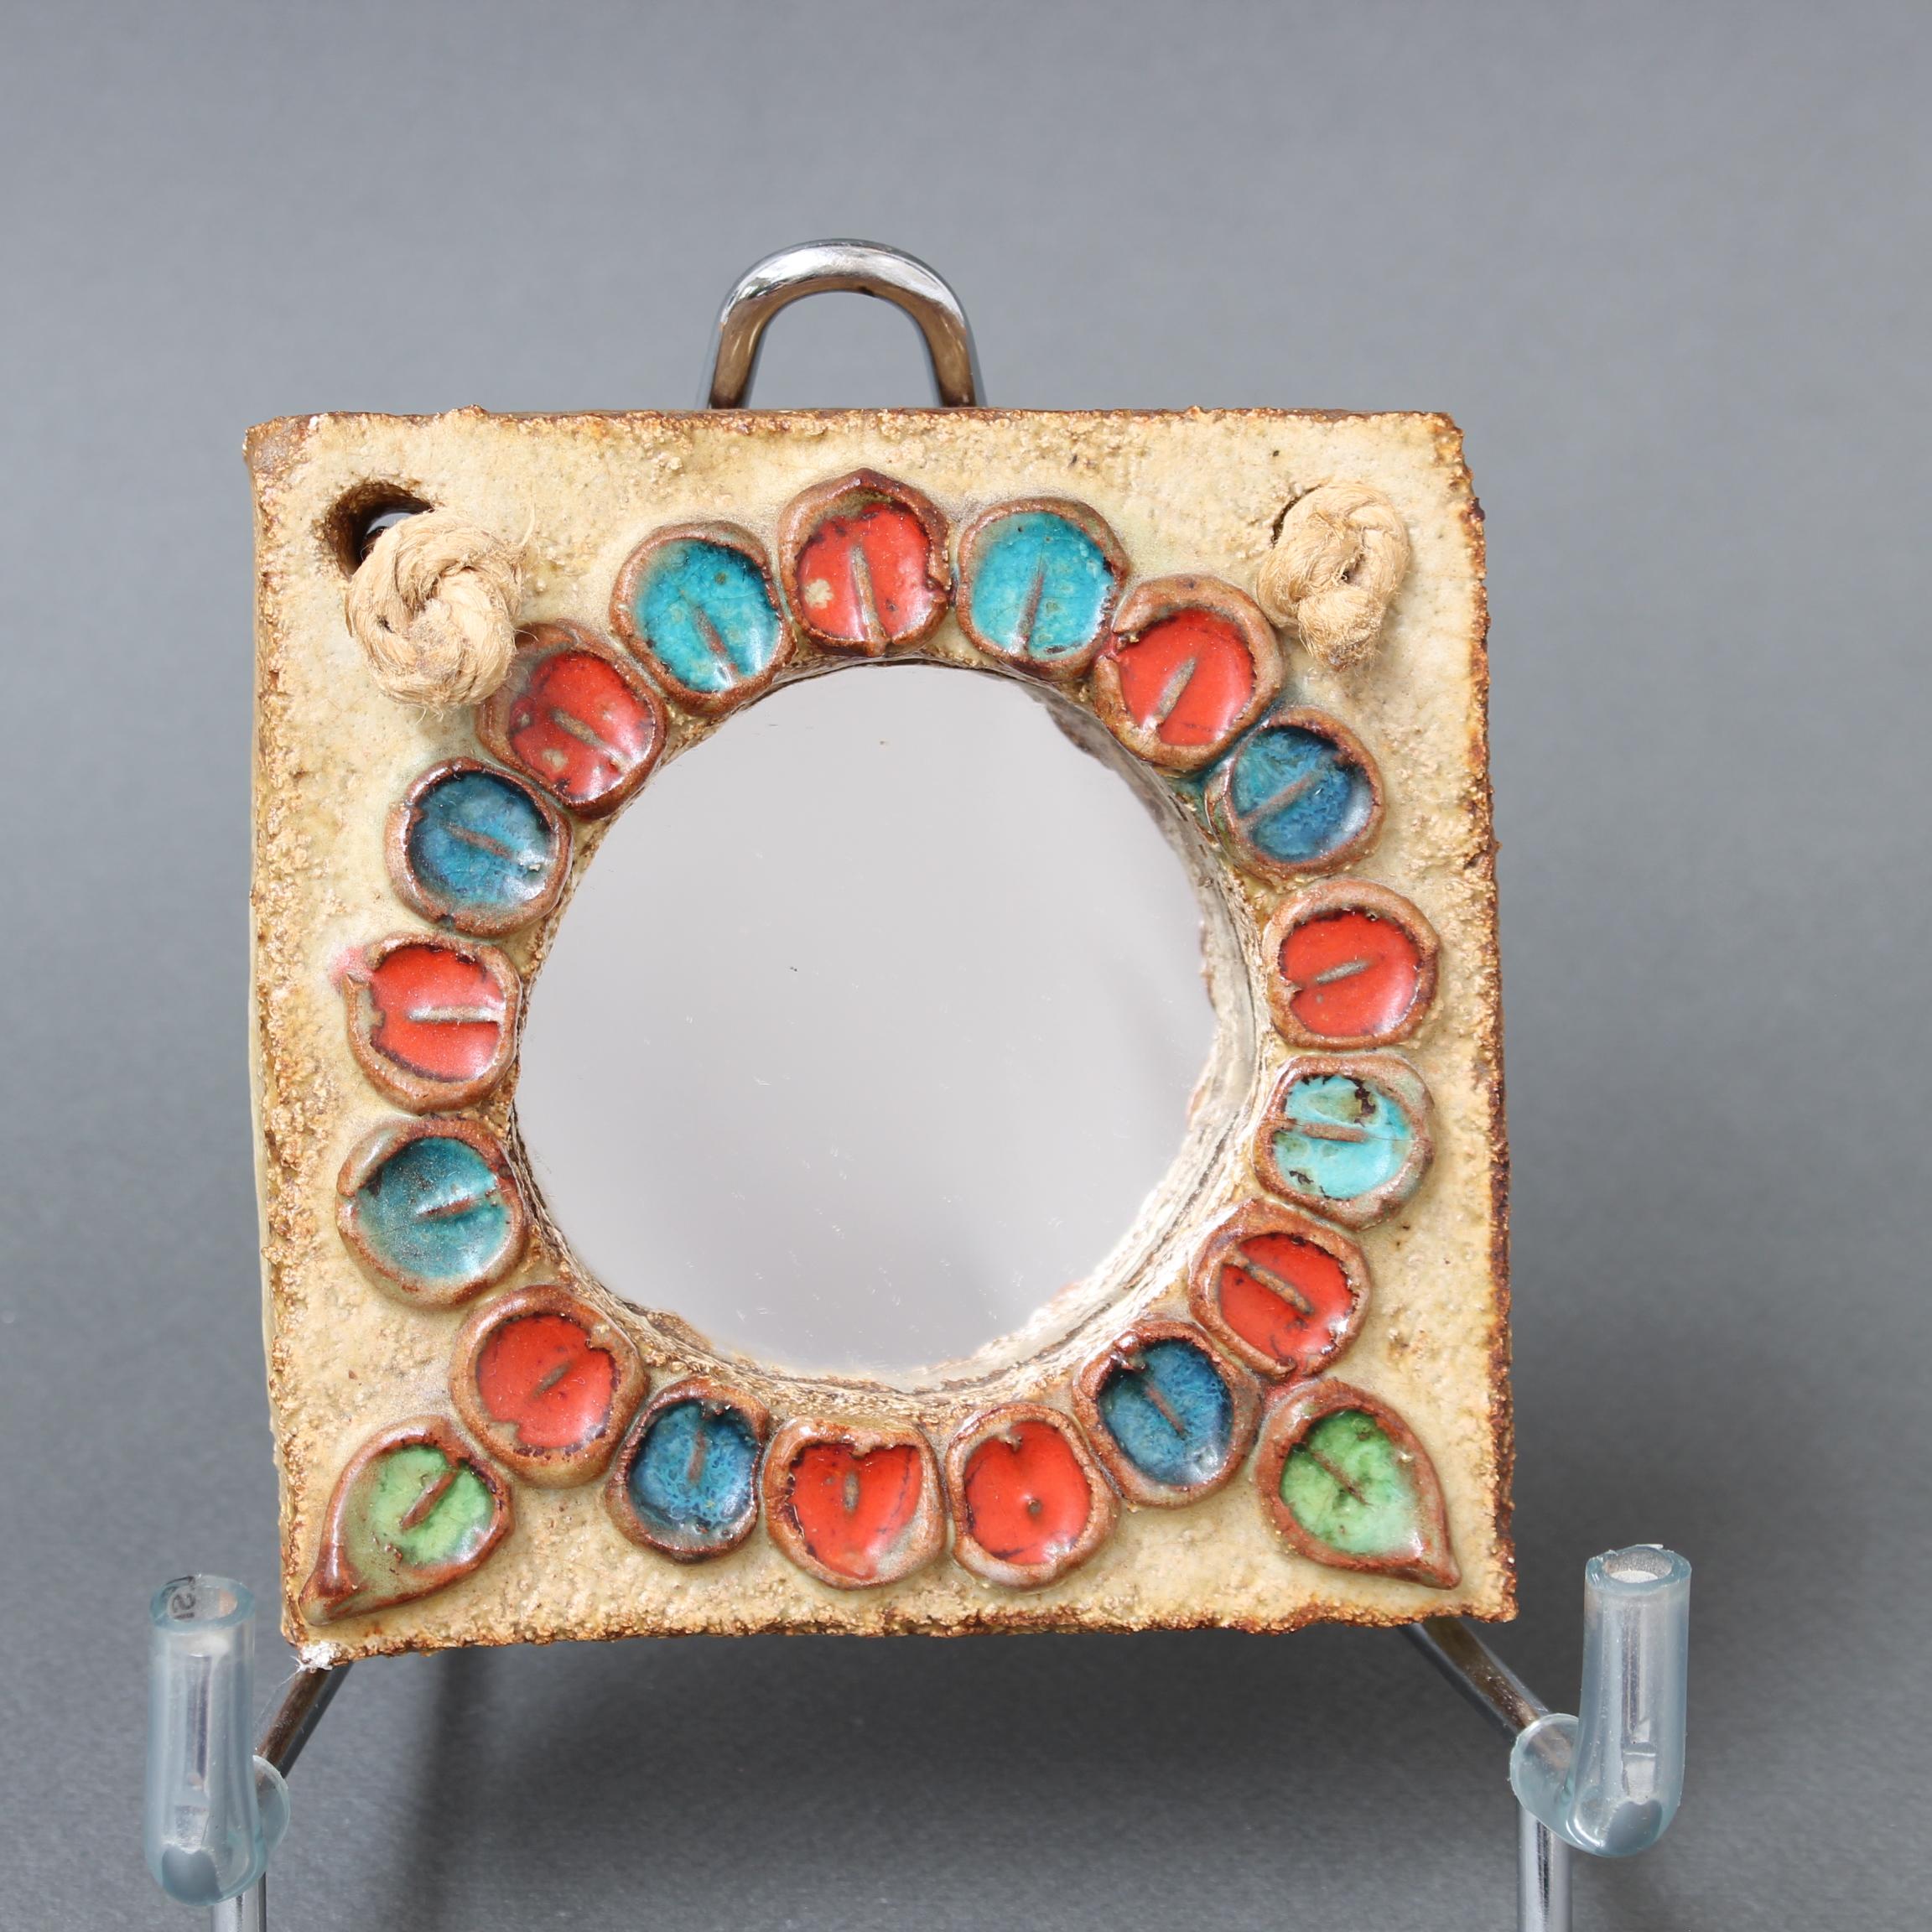 Small ceramic flower-motif wall mirror attributed to La Roue, Vallauris, France (circa 1960s). A charming, decorative mirror with rustic but colourful details surrounding the diminutive round mirror glass. In good overall condition showing